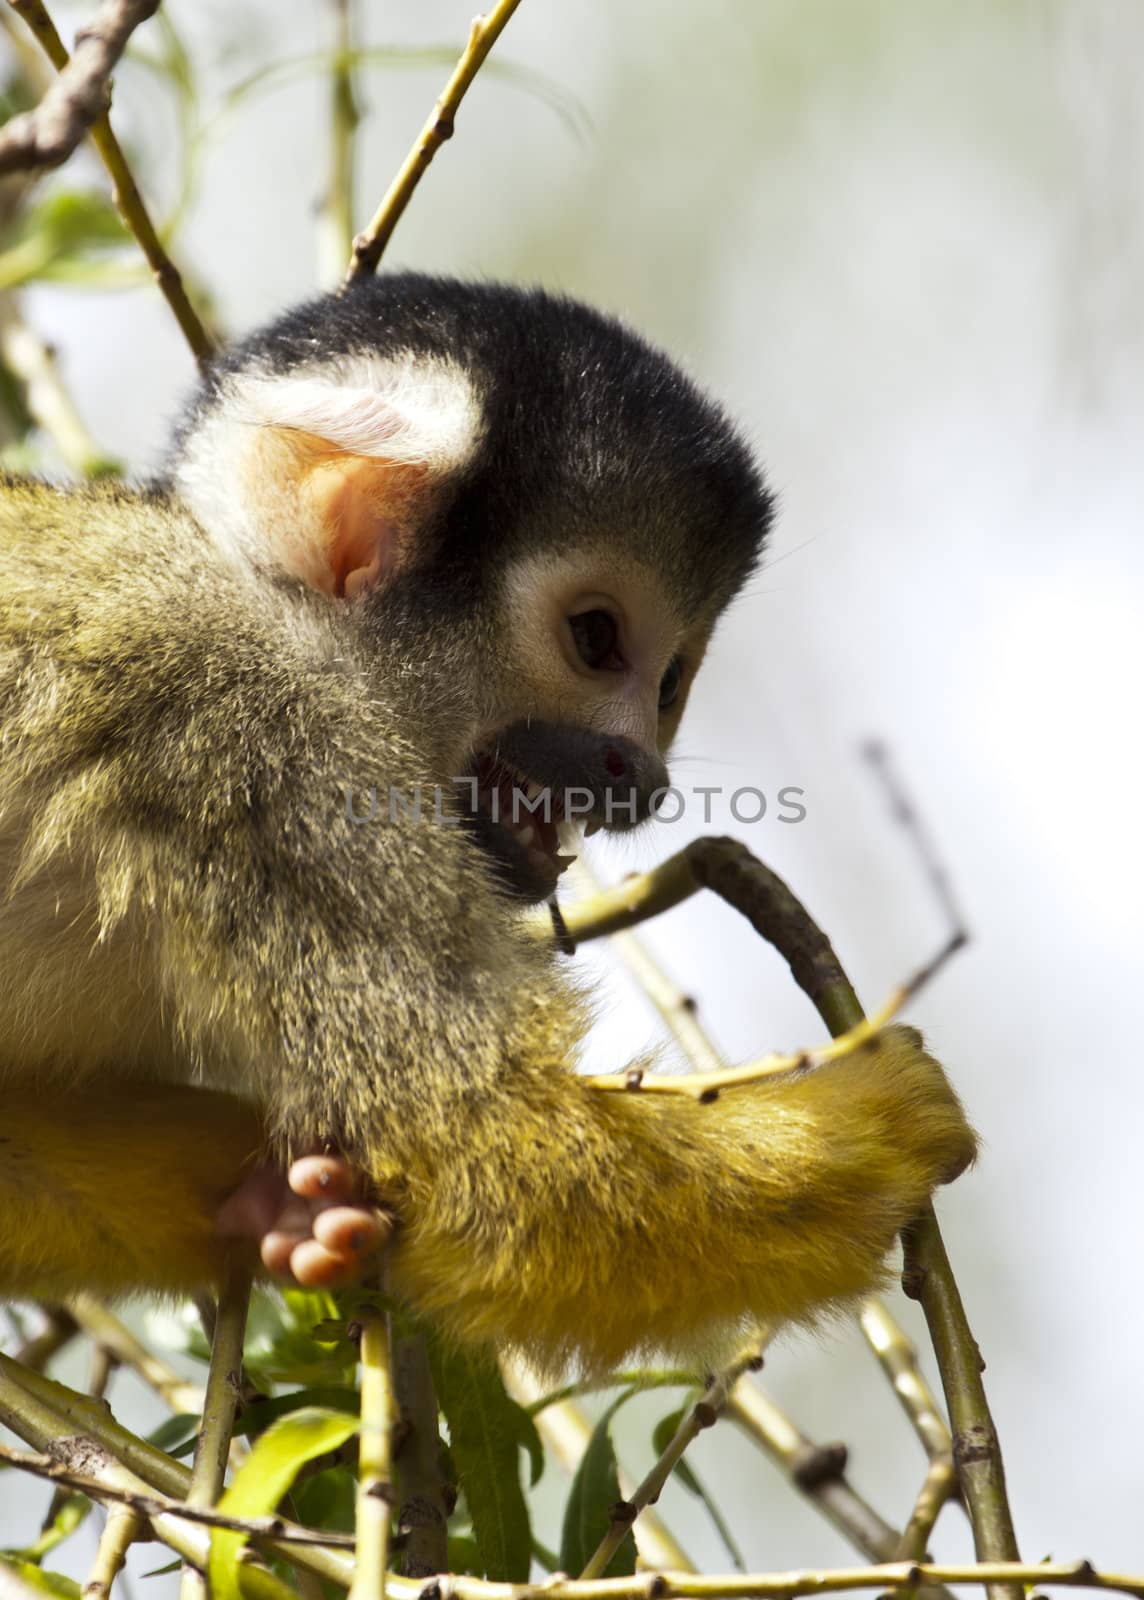 Squirrel monkey eating in a tree